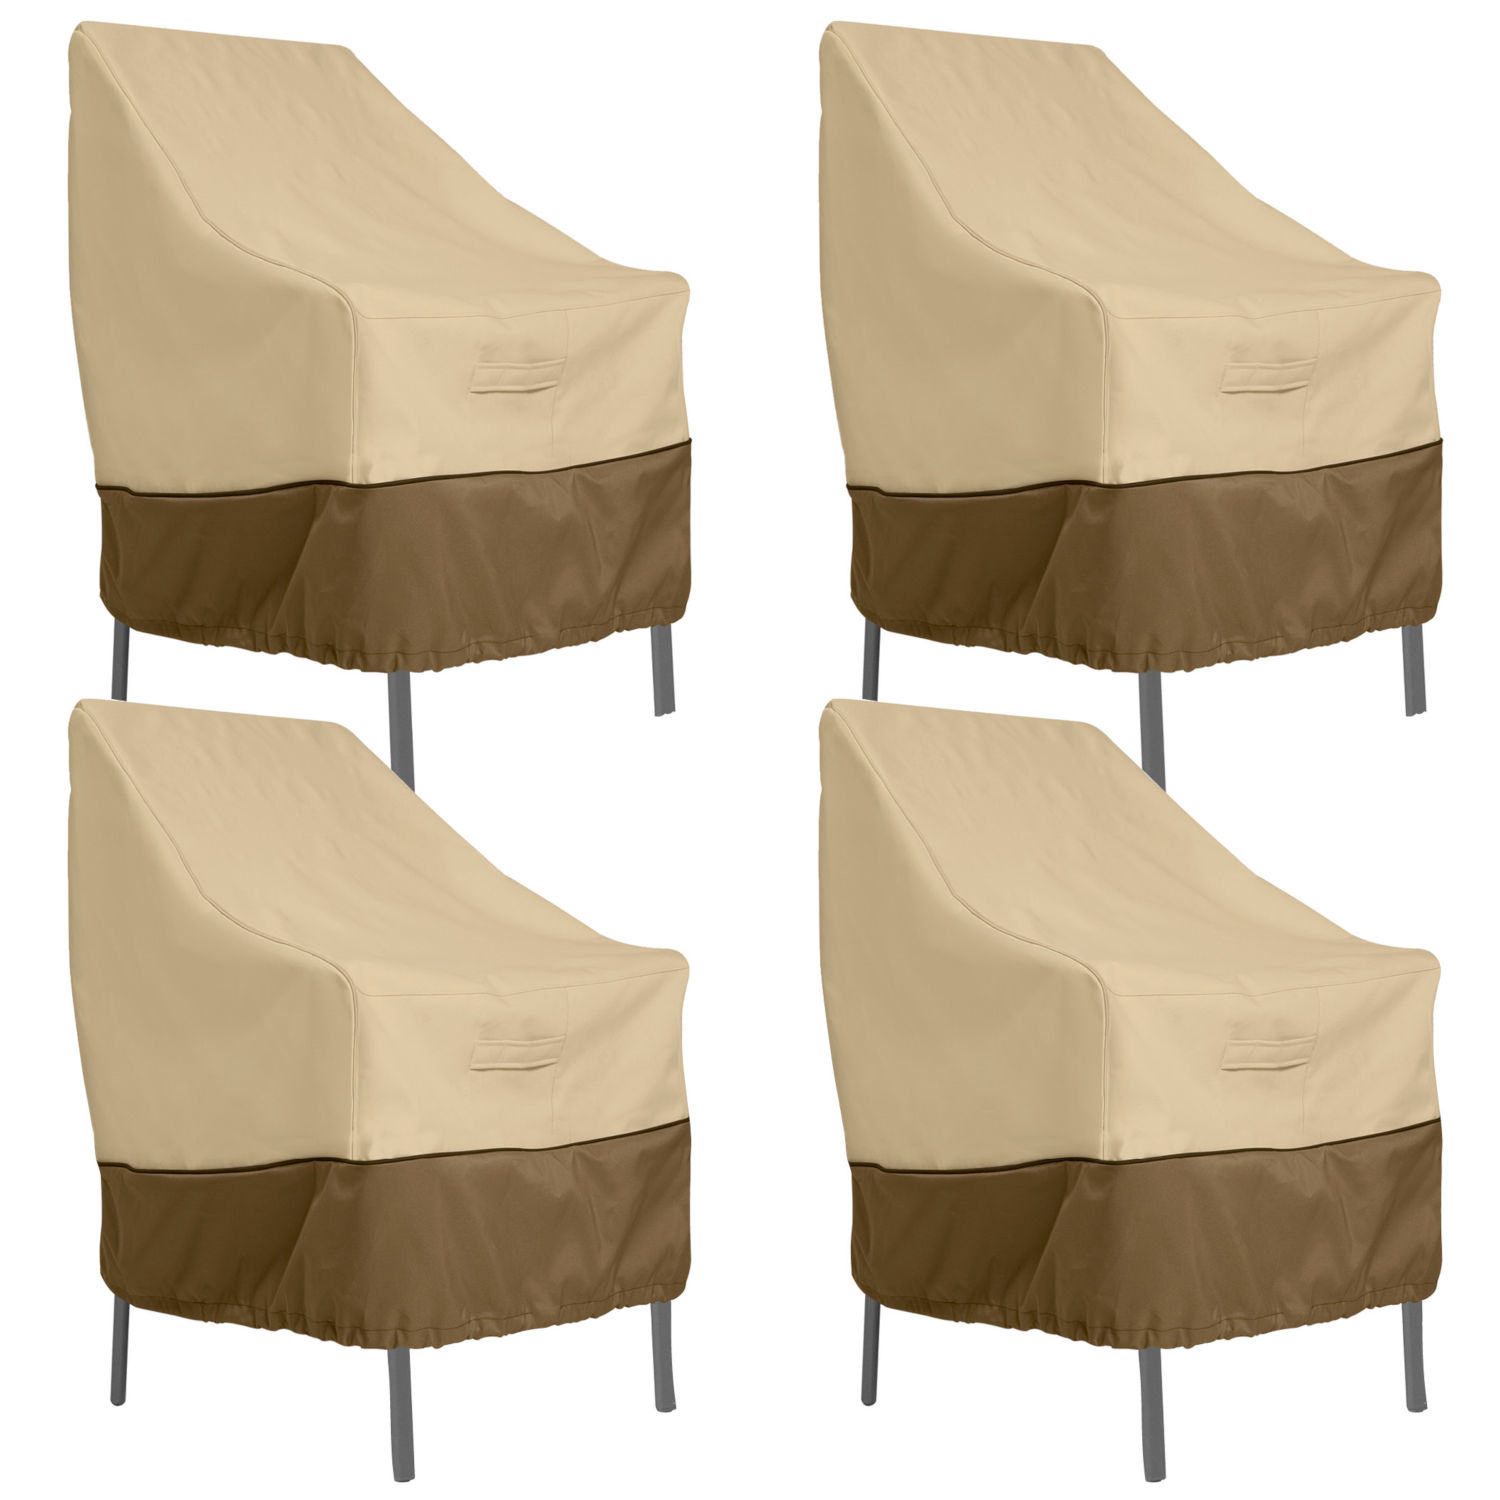 Patio Furniture Covers Category